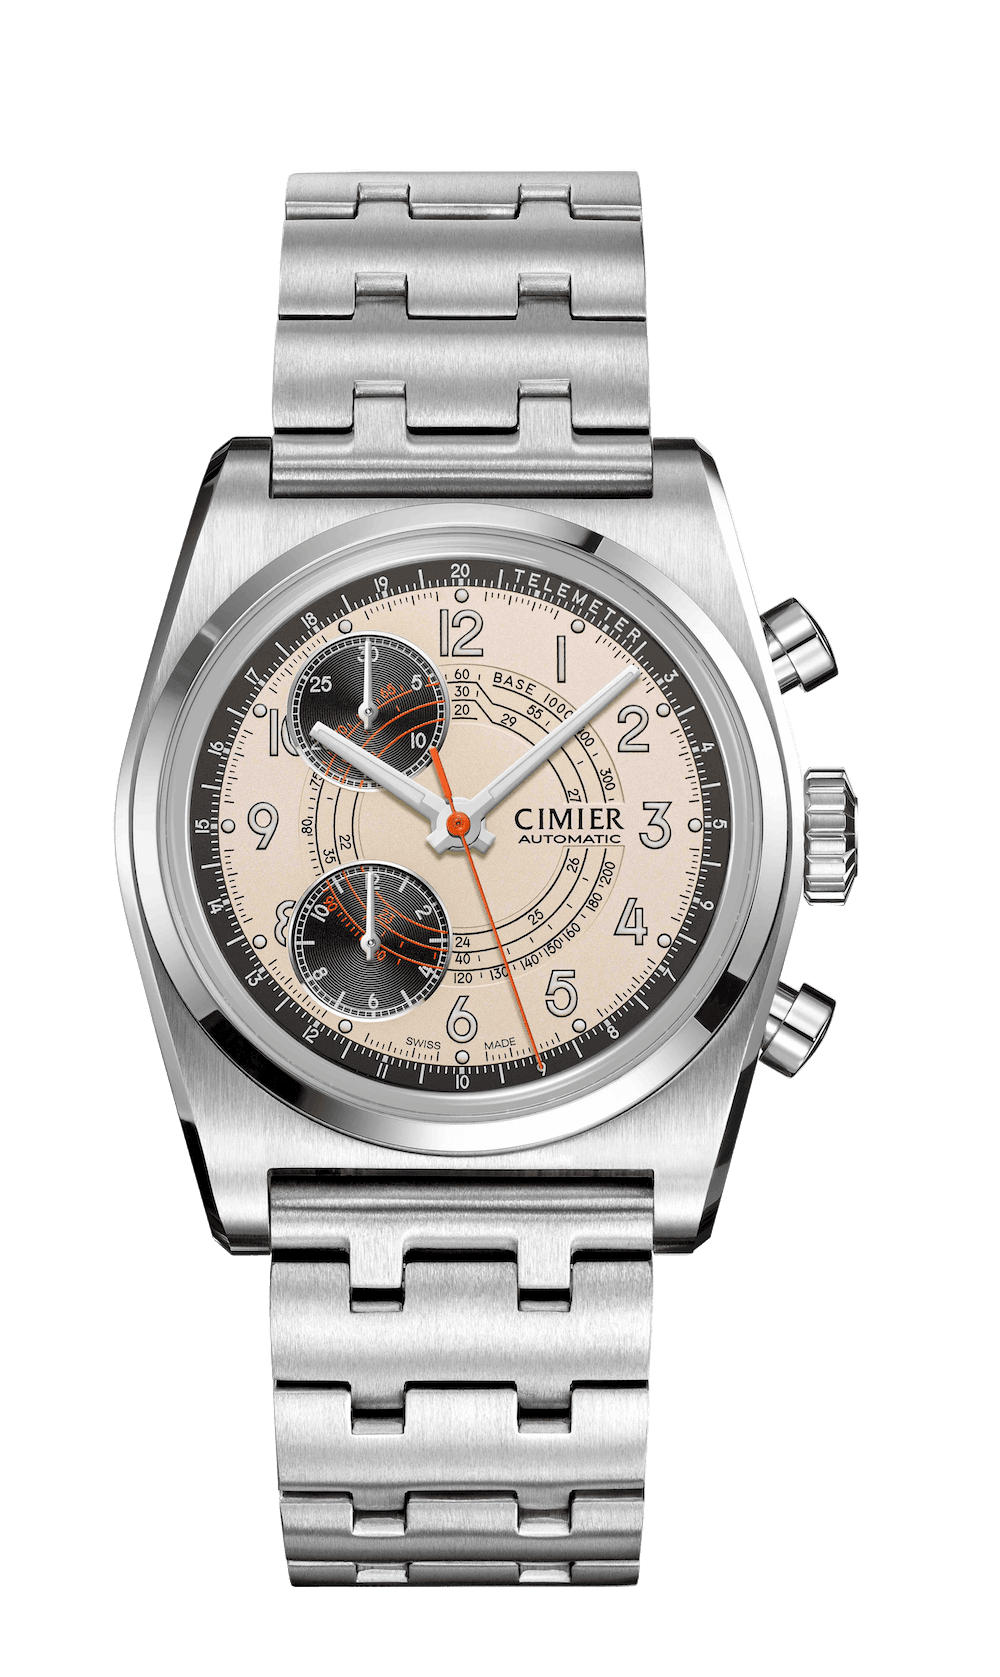 Cimier 711 Heritage Chronograph wristwatch with white dial and steel bracelet